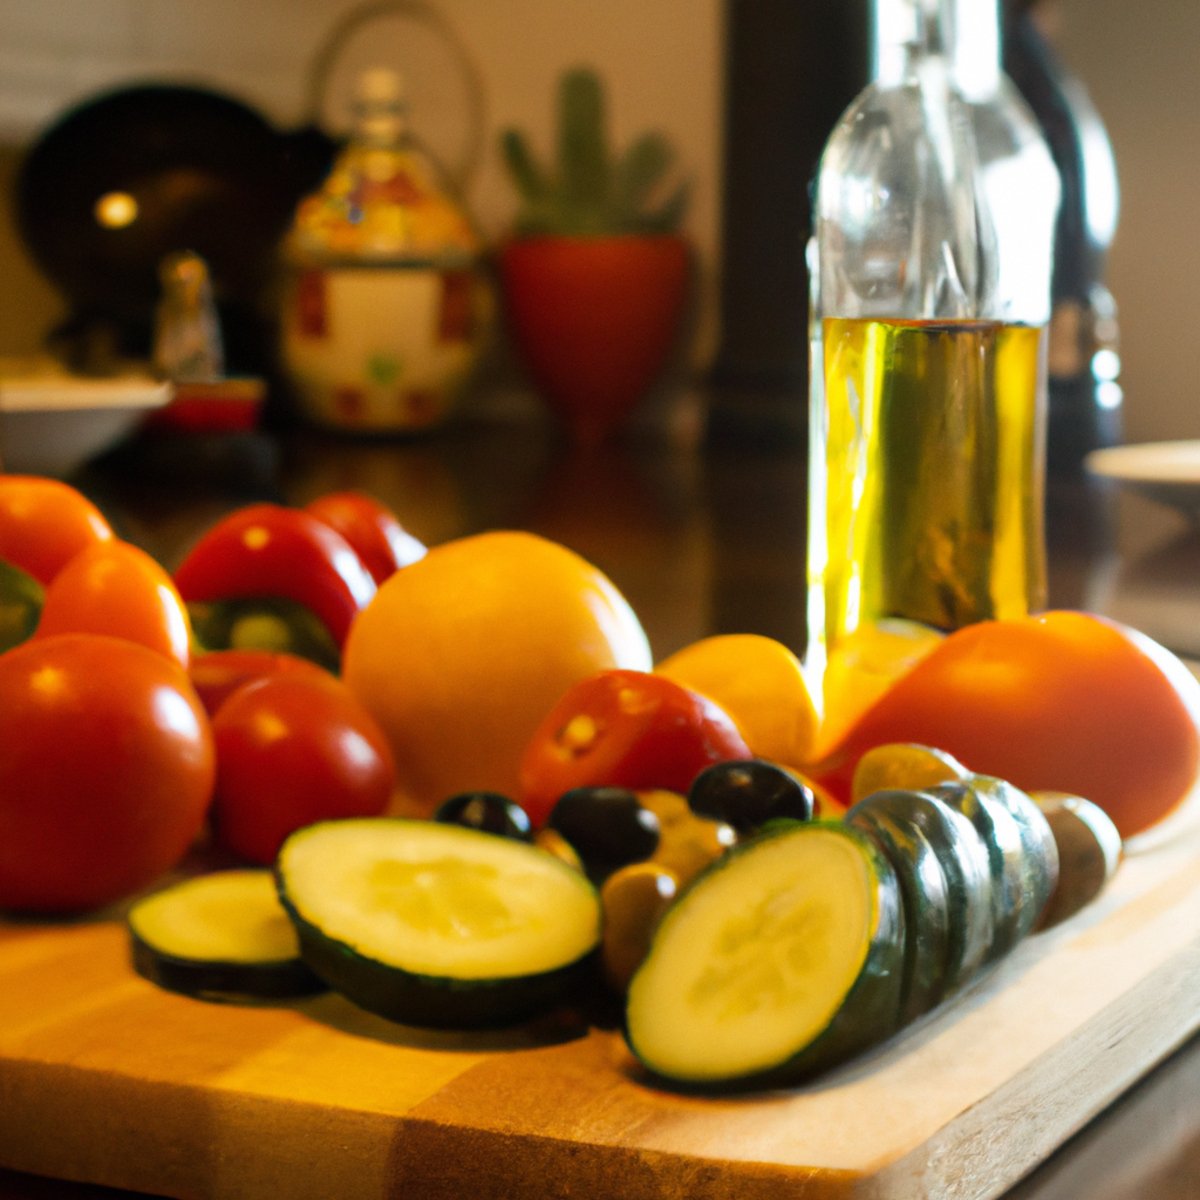 The photo shows a wooden cutting board with a variety of colorful fruits and vegetables arranged neatly on top. There are ripe tomatoes, crisp cucumbers, vibrant bell peppers, and juicy oranges. In the background, a glass jar filled with olives and a bottle of olive oil can be seen. The natural lighting highlights the freshness of the produce and the healthy choices that can be made with the Mediterranean diet.